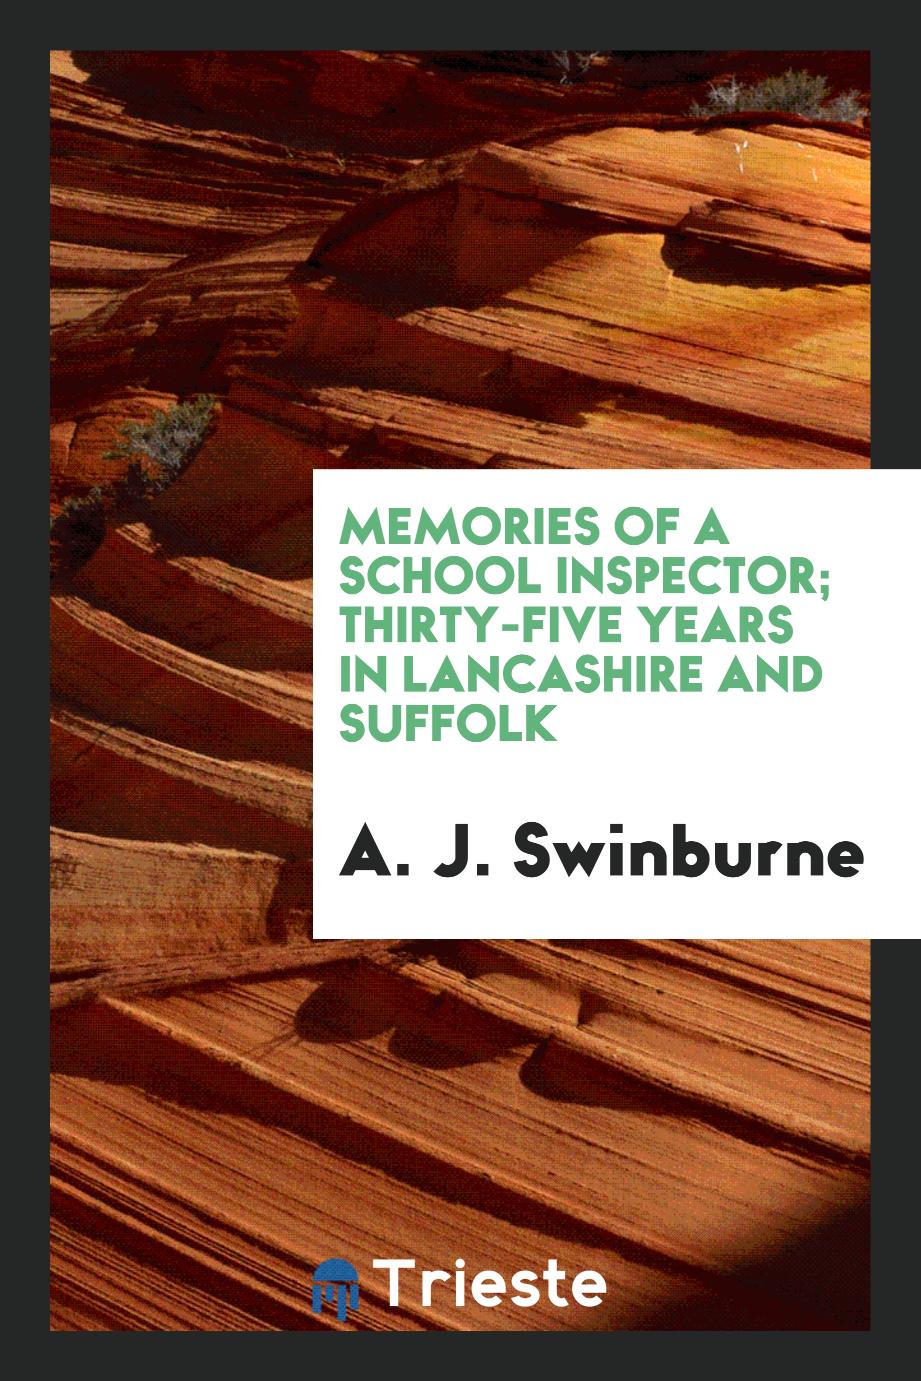 Memories of a school inspector; thirty-five years in Lancashire and Suffolk